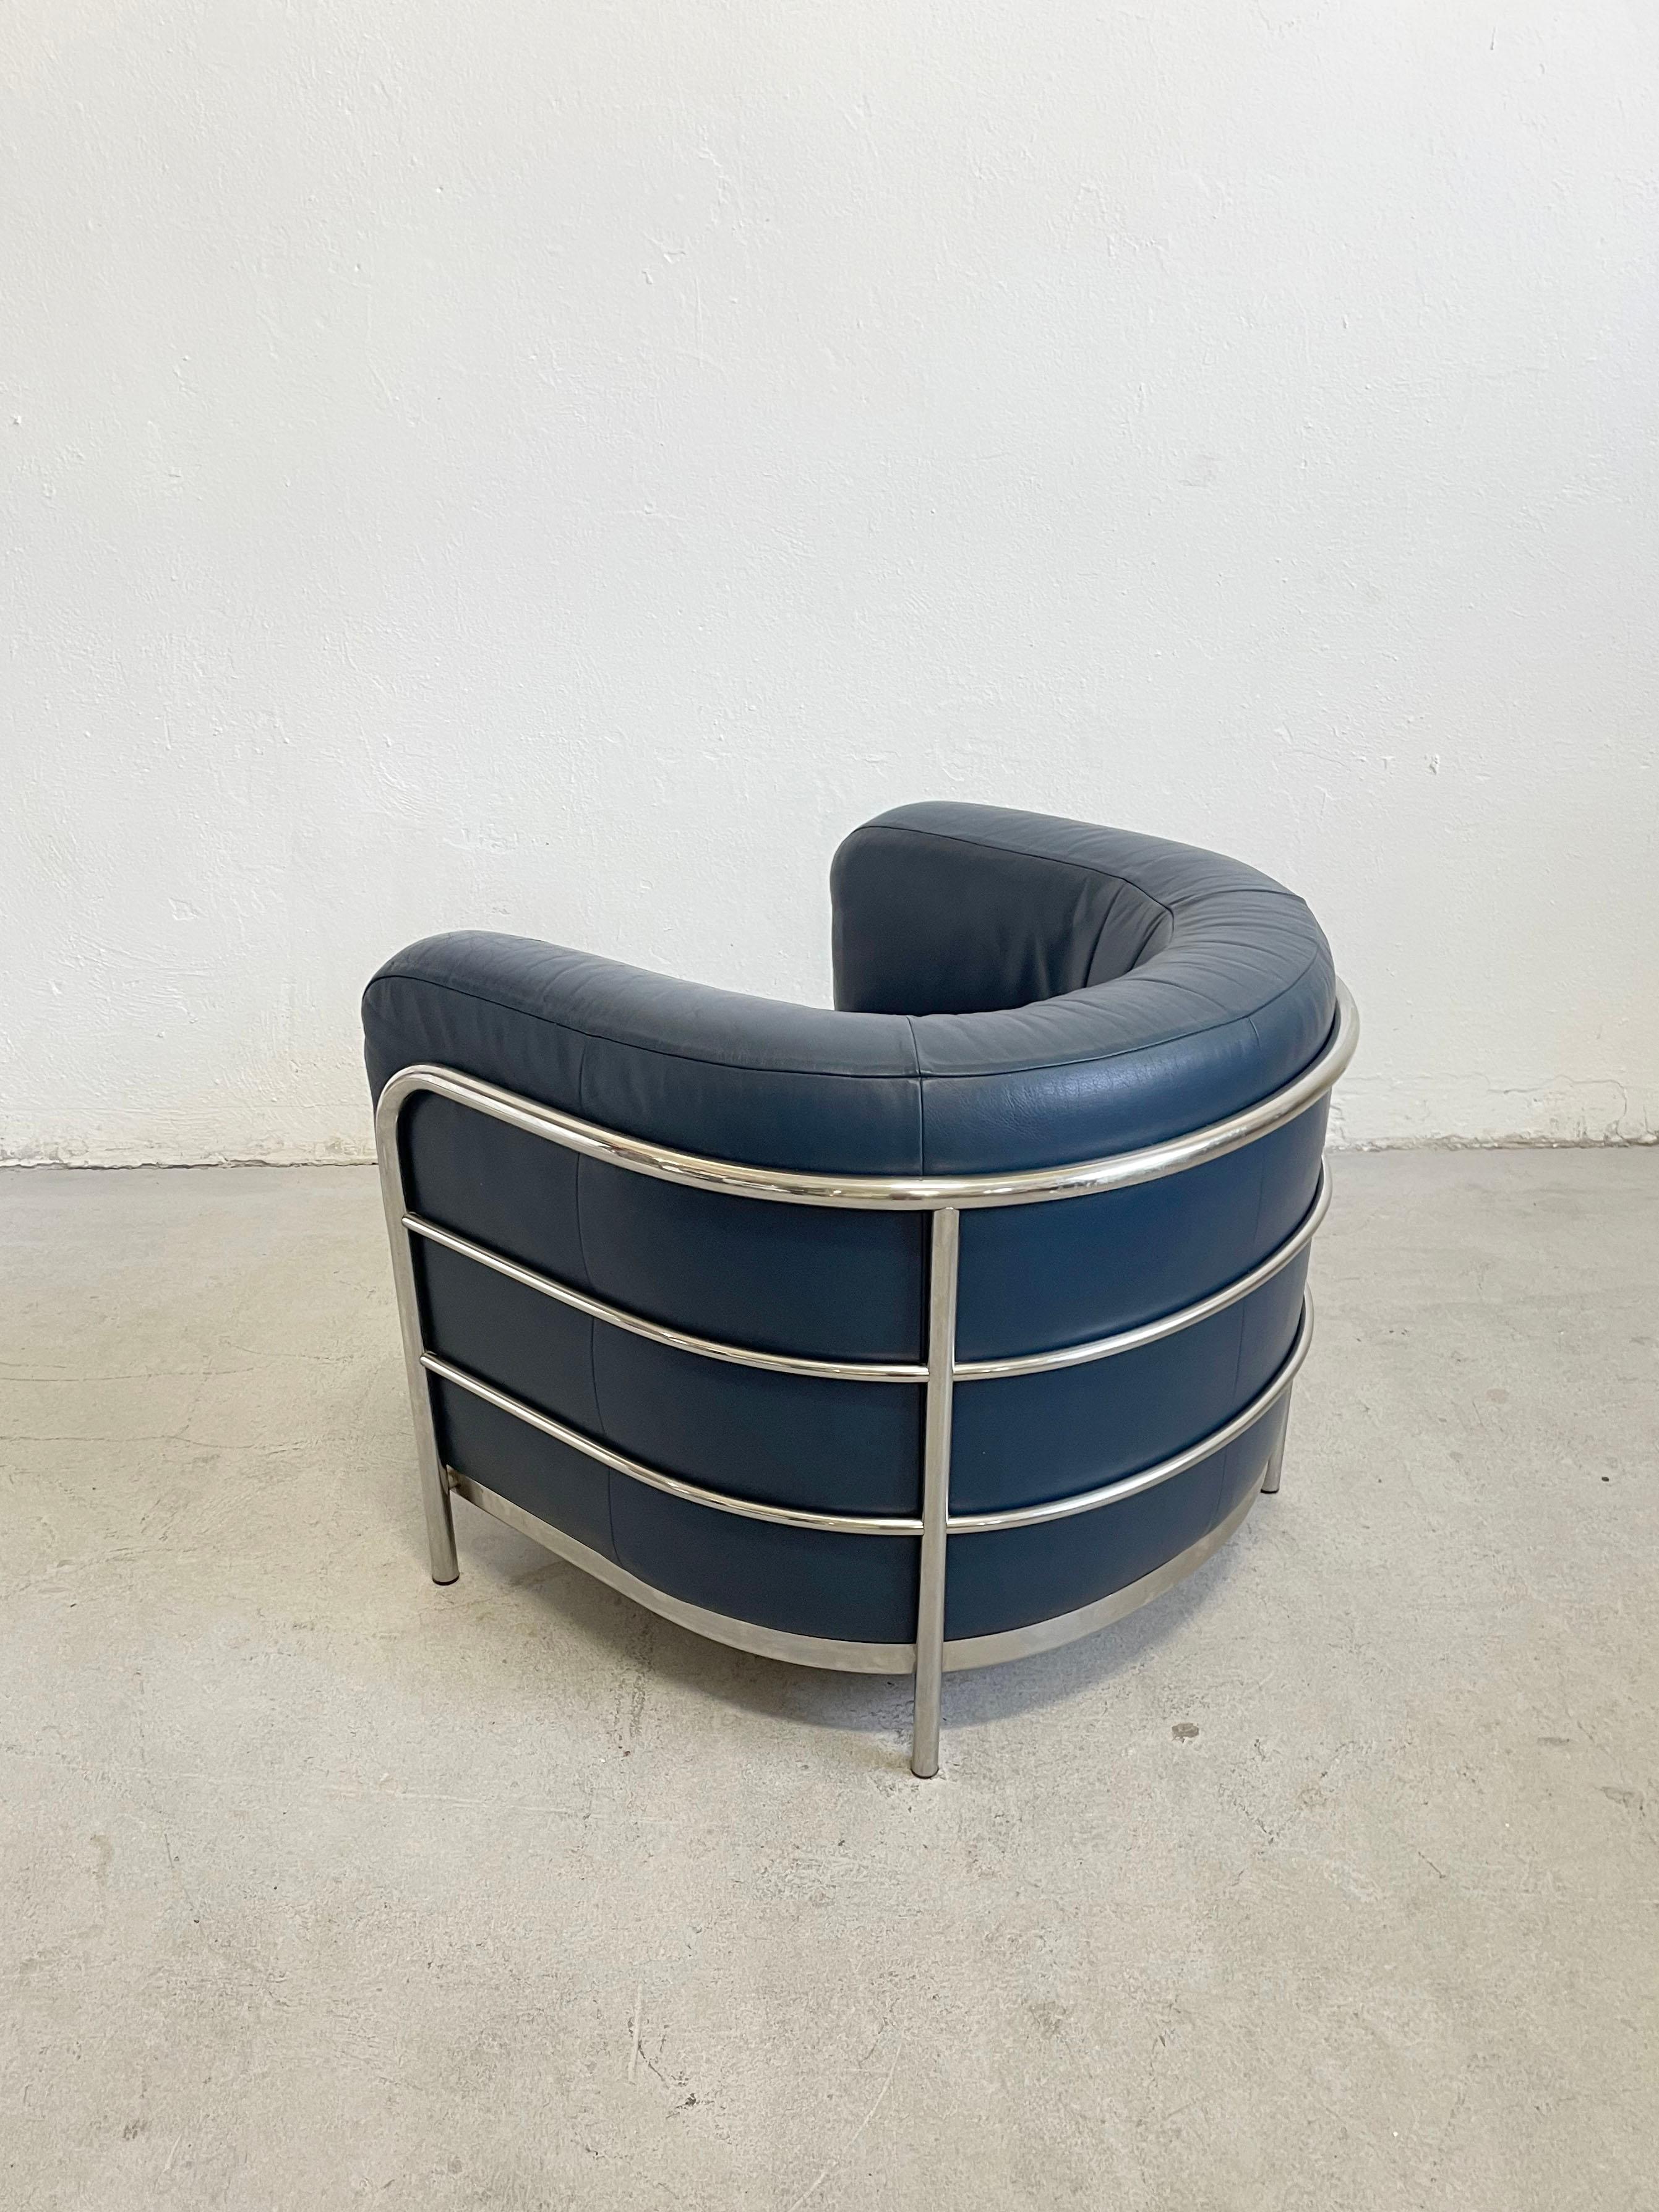 De Pas, D’Urbino and Lomazzi for Zanotta, armchair, model 'Onda', leather, chrome, Italy, 1985

Rounded and curved ‘Onda’ chair by Jonathan de Pas, Donato D'urbino and Paolo Lomazzi. The piece was designed for Zanotta in 1985. The expressive curves